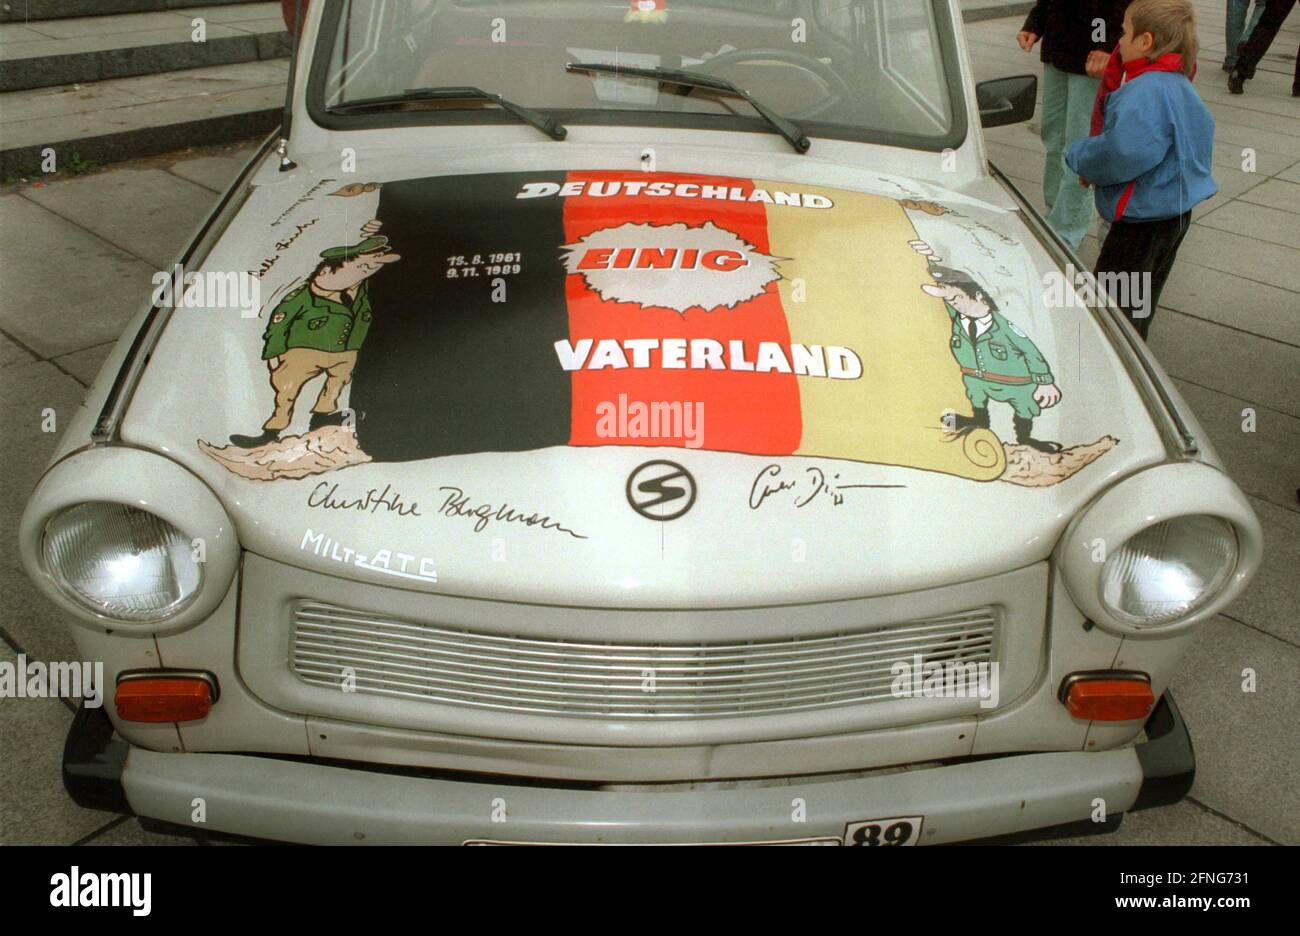 Berlin / GDR / 1995 GDR nostalgia rediscovers the Trabi as a cult vehicle. At a meeting in Berlin, a model is shown with slogans such as -Unity- -Germany united fatherland- // Trabi / symbol / [automated translation] Stock Photo